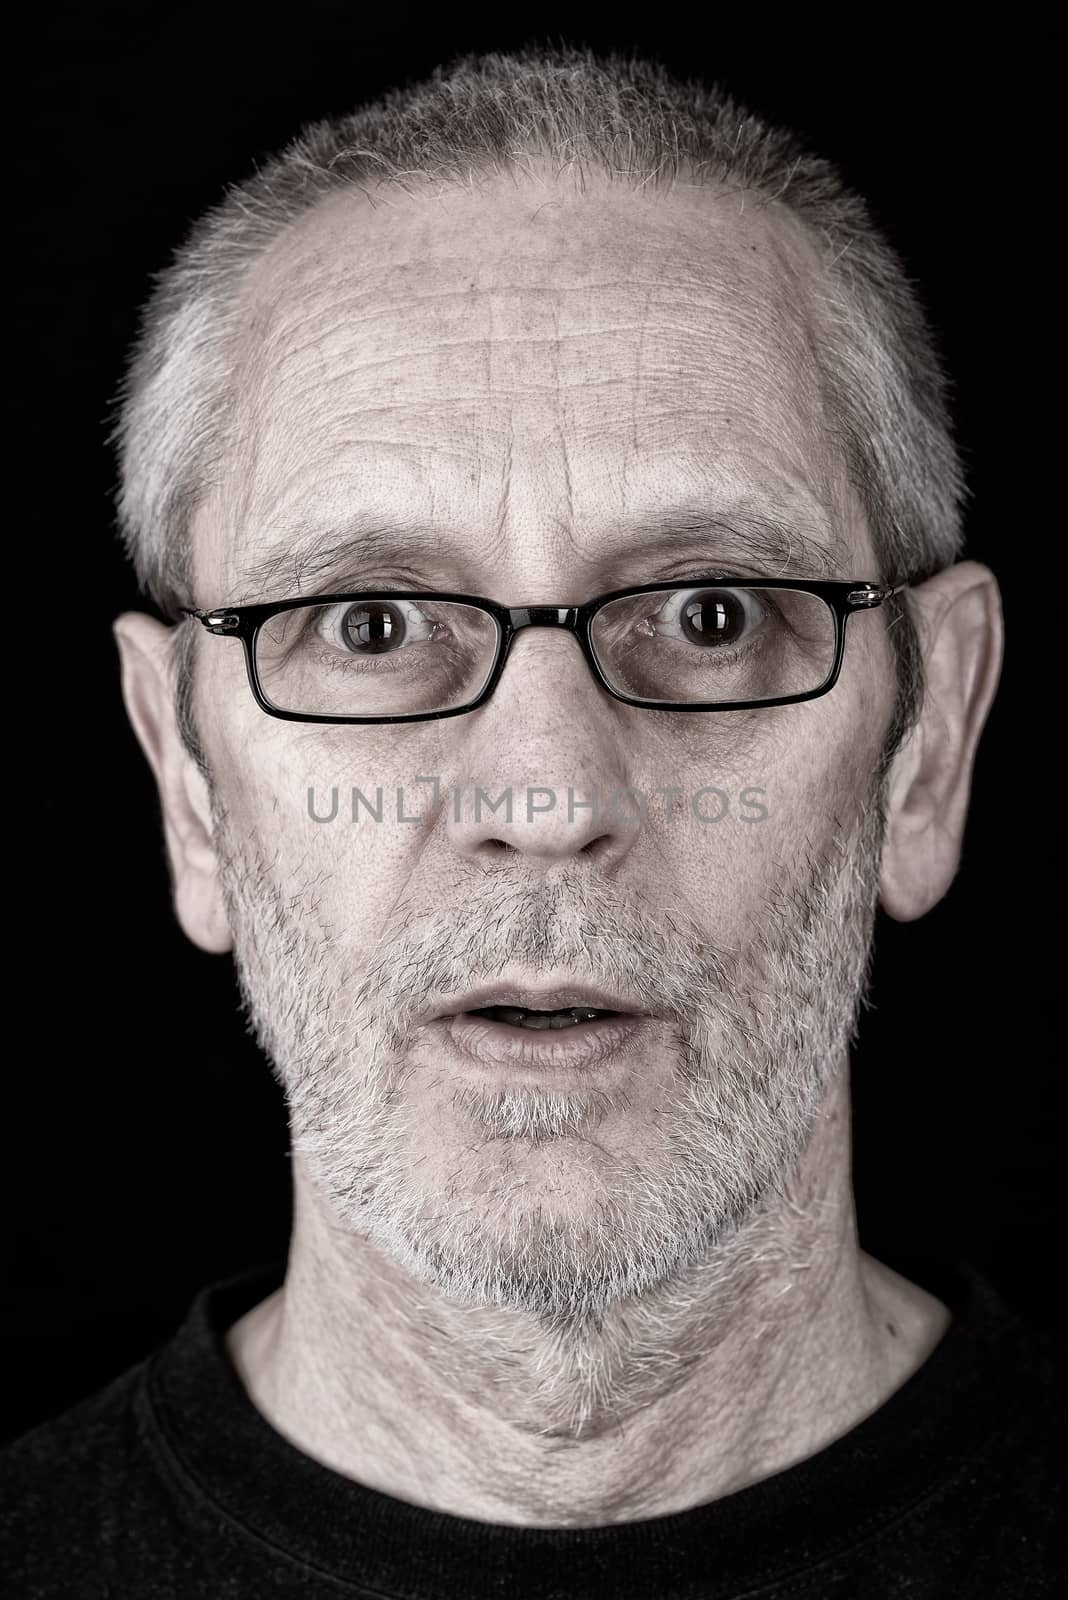 Portrait of a surprised and confident man wearing glasses, with open mouth